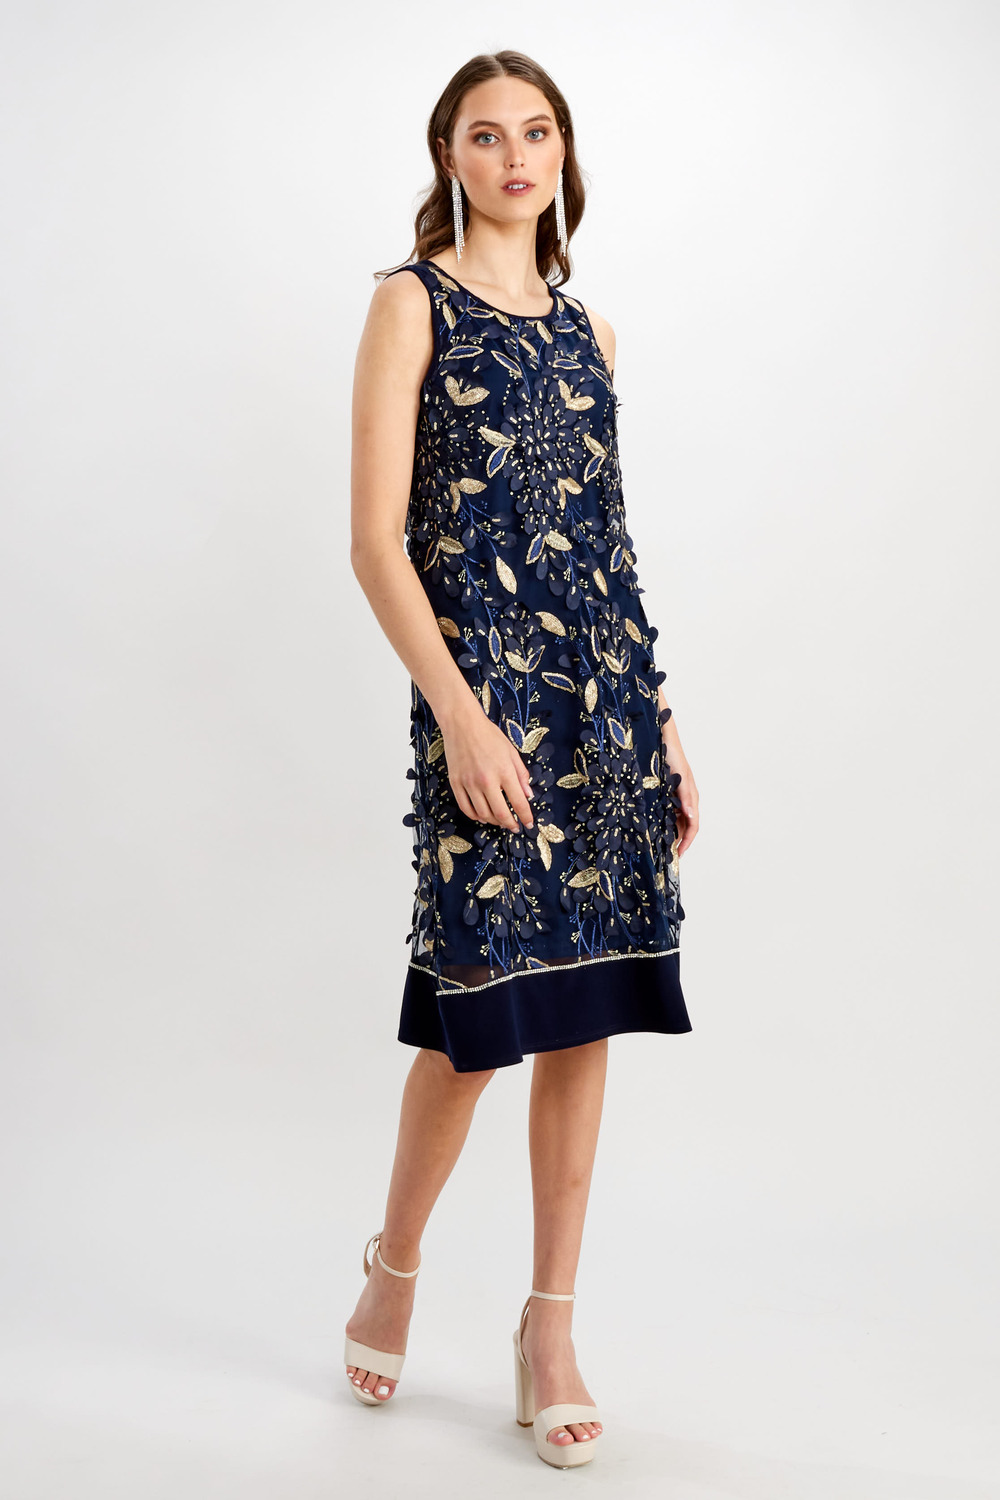 Sequin Floral Tank Dress Style 248320. Midnight Blue/gold